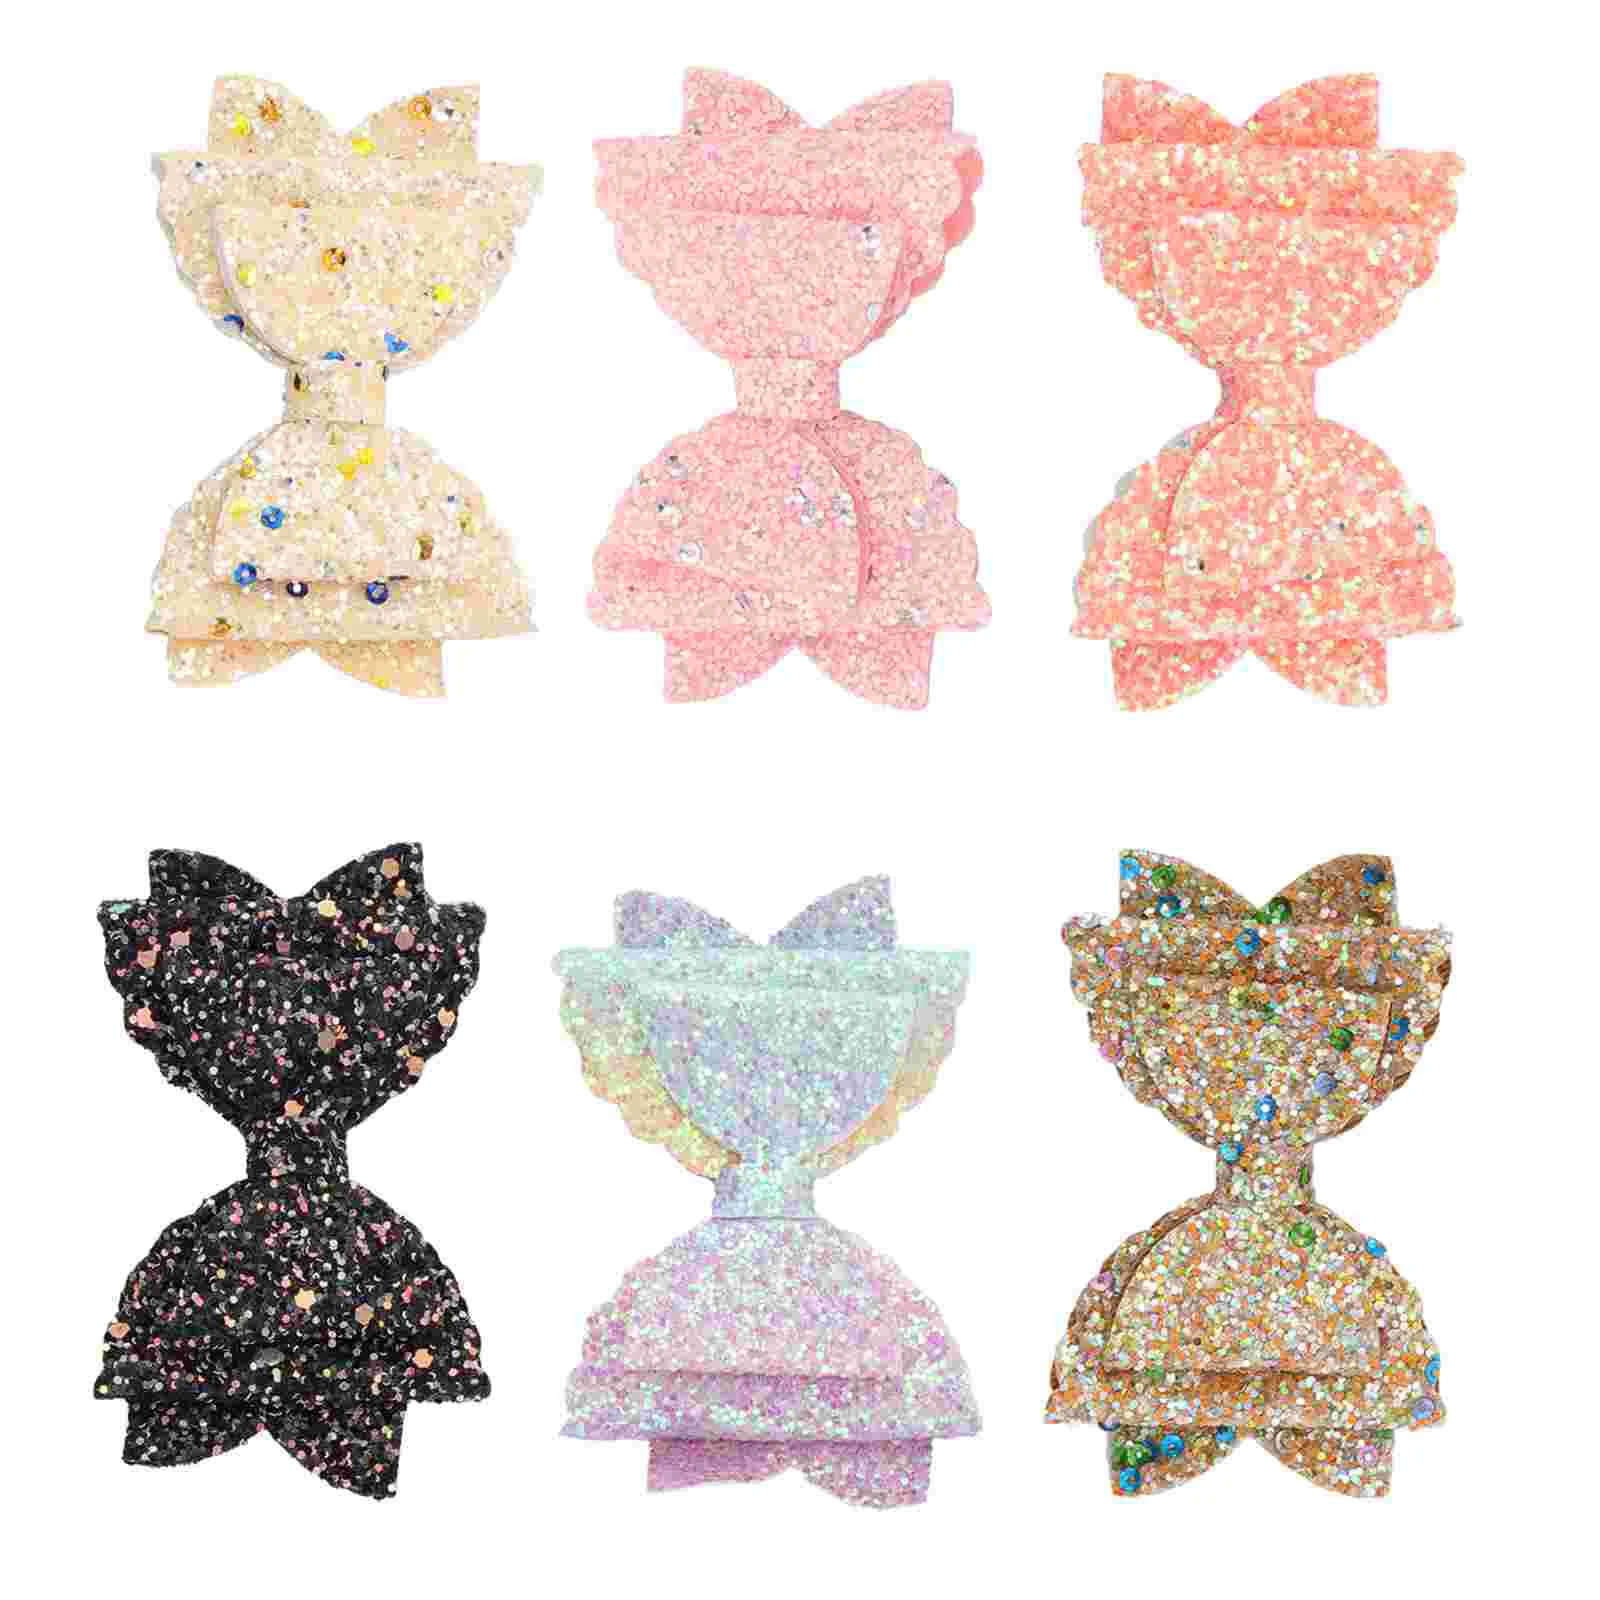 

6 Pcs Double Sequin Barrette Bowknot Hairpins Gold Accessories Ornaments Snap Barrettes Women Kids Clamps Self Made